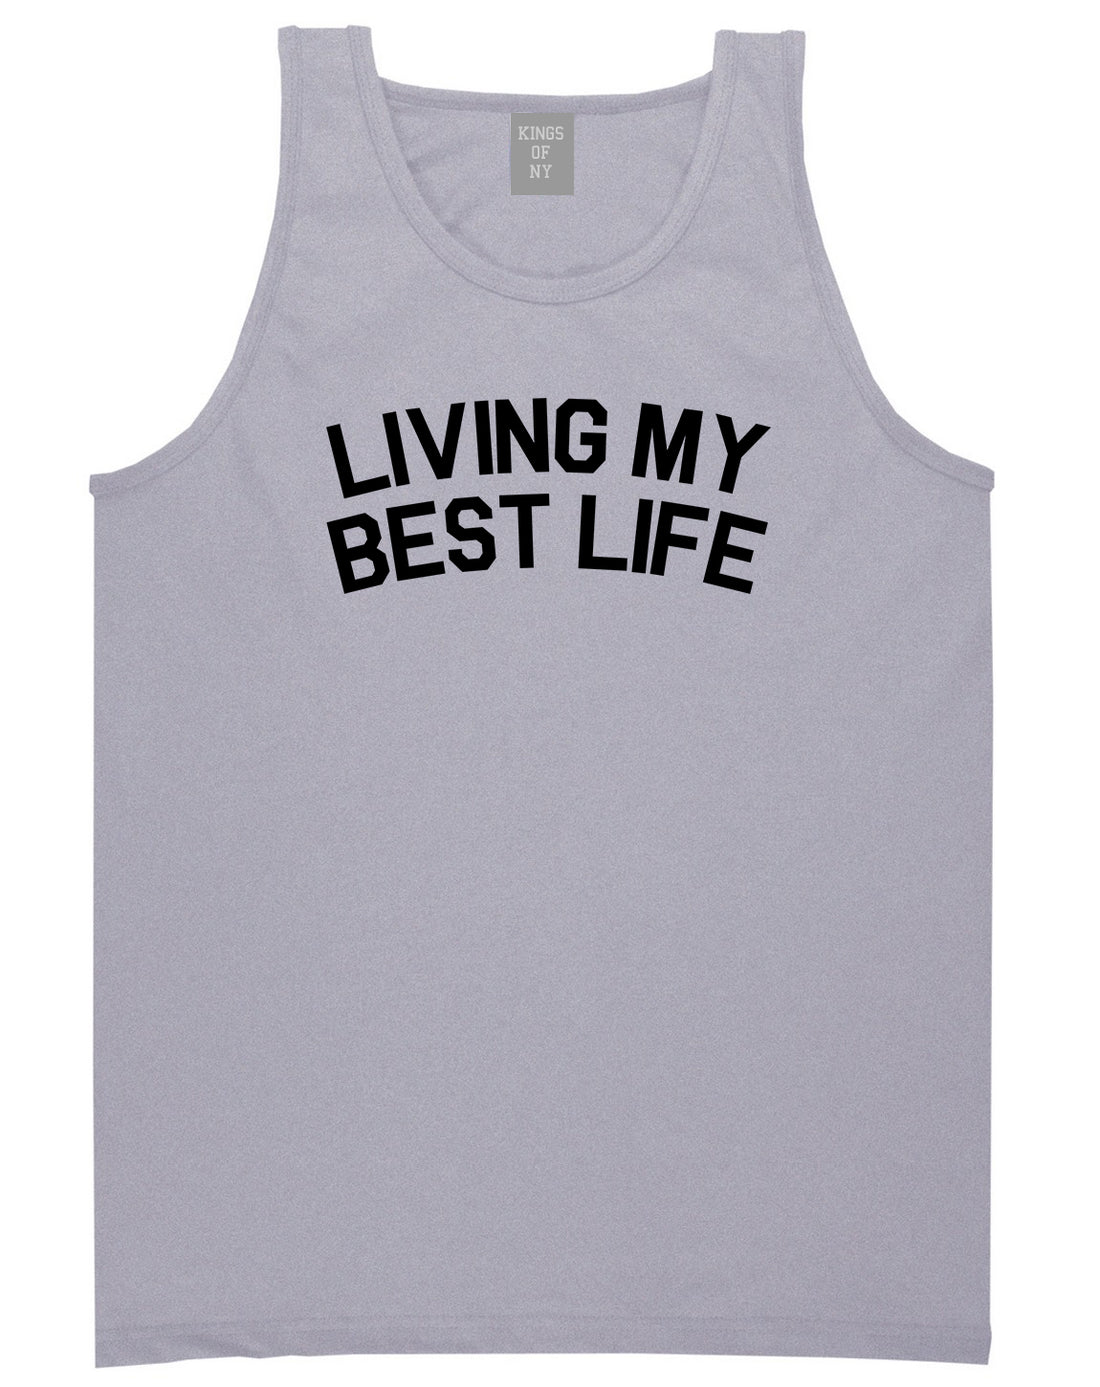 Living My Best Life Mens Tank Top Shirt Grey by Kings Of NY